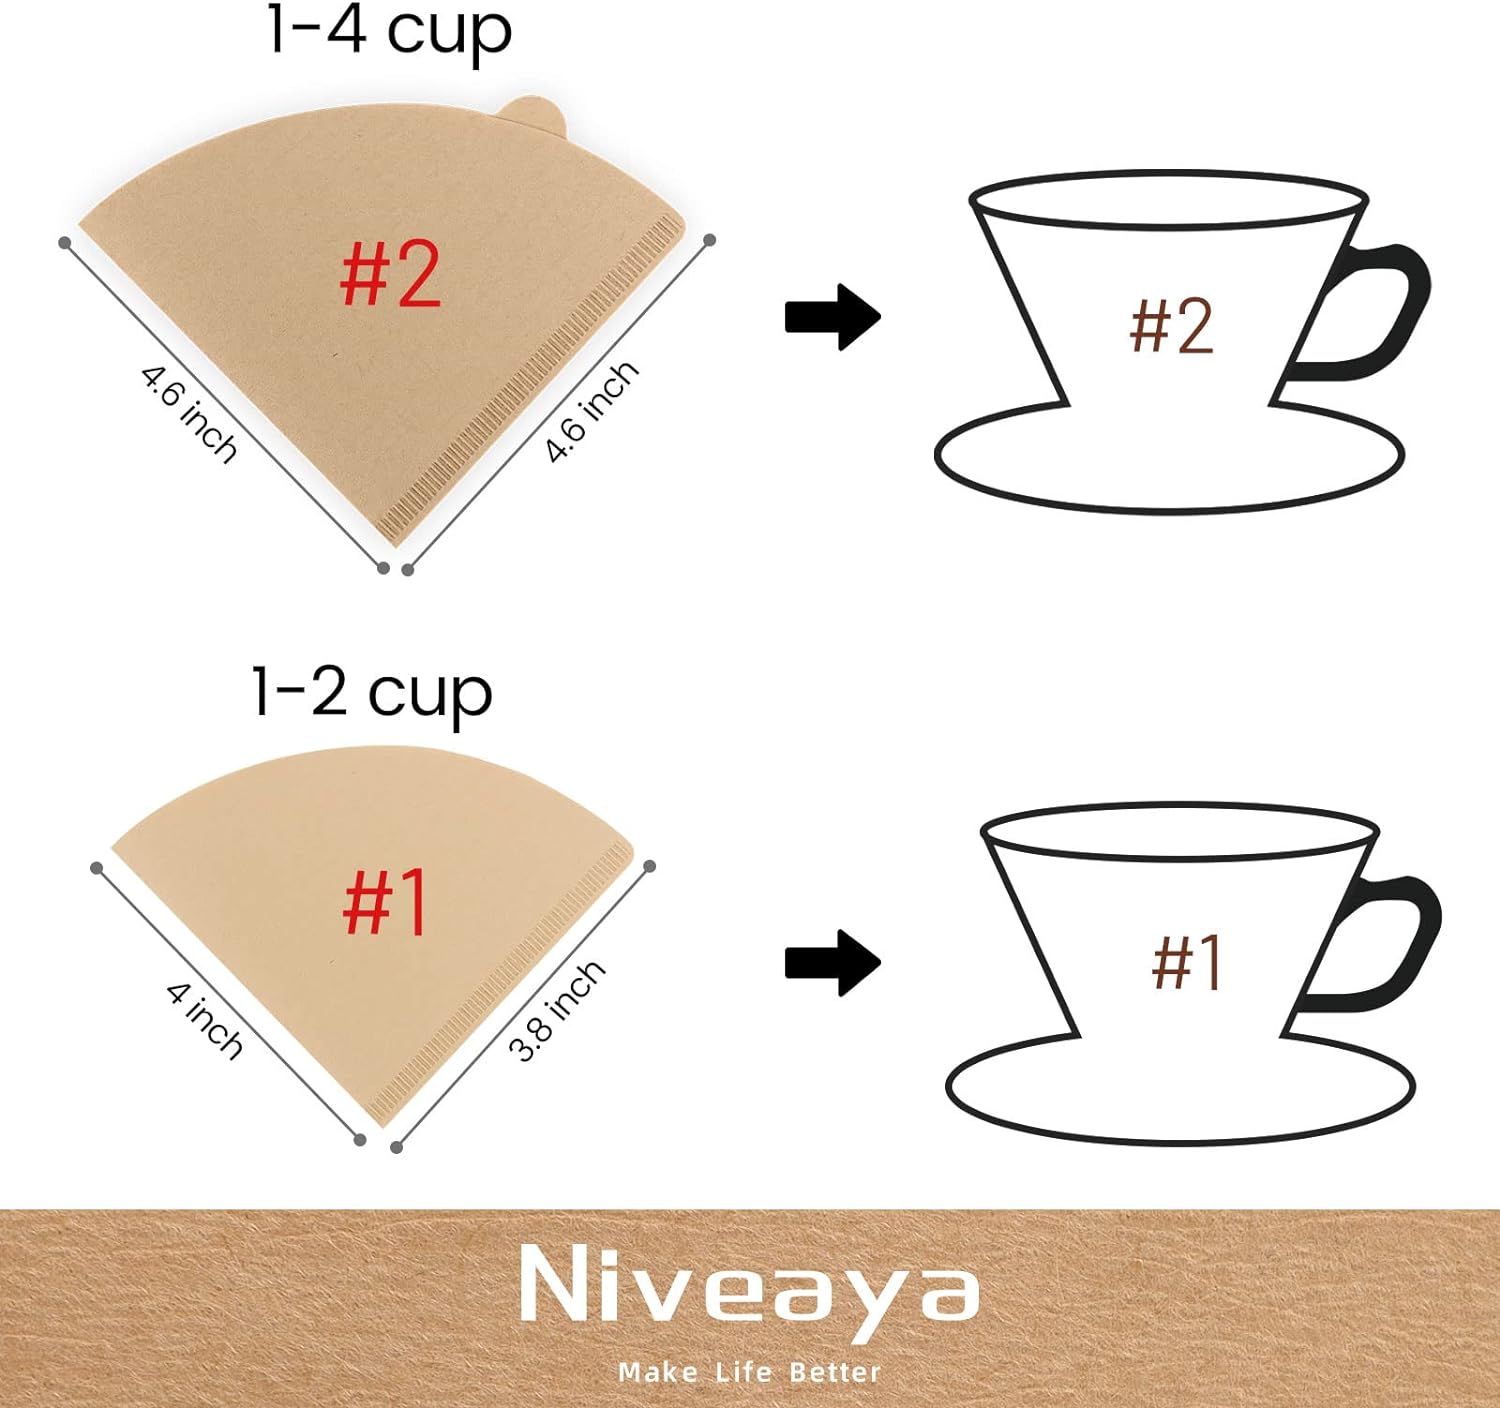 Niveaya 200 Count Coffee Filters - Size 02, Natural Paper Coffee Filter, No Blowout, Disposable for Pour Over and Drip Coffee Maker (2-4 Cup)